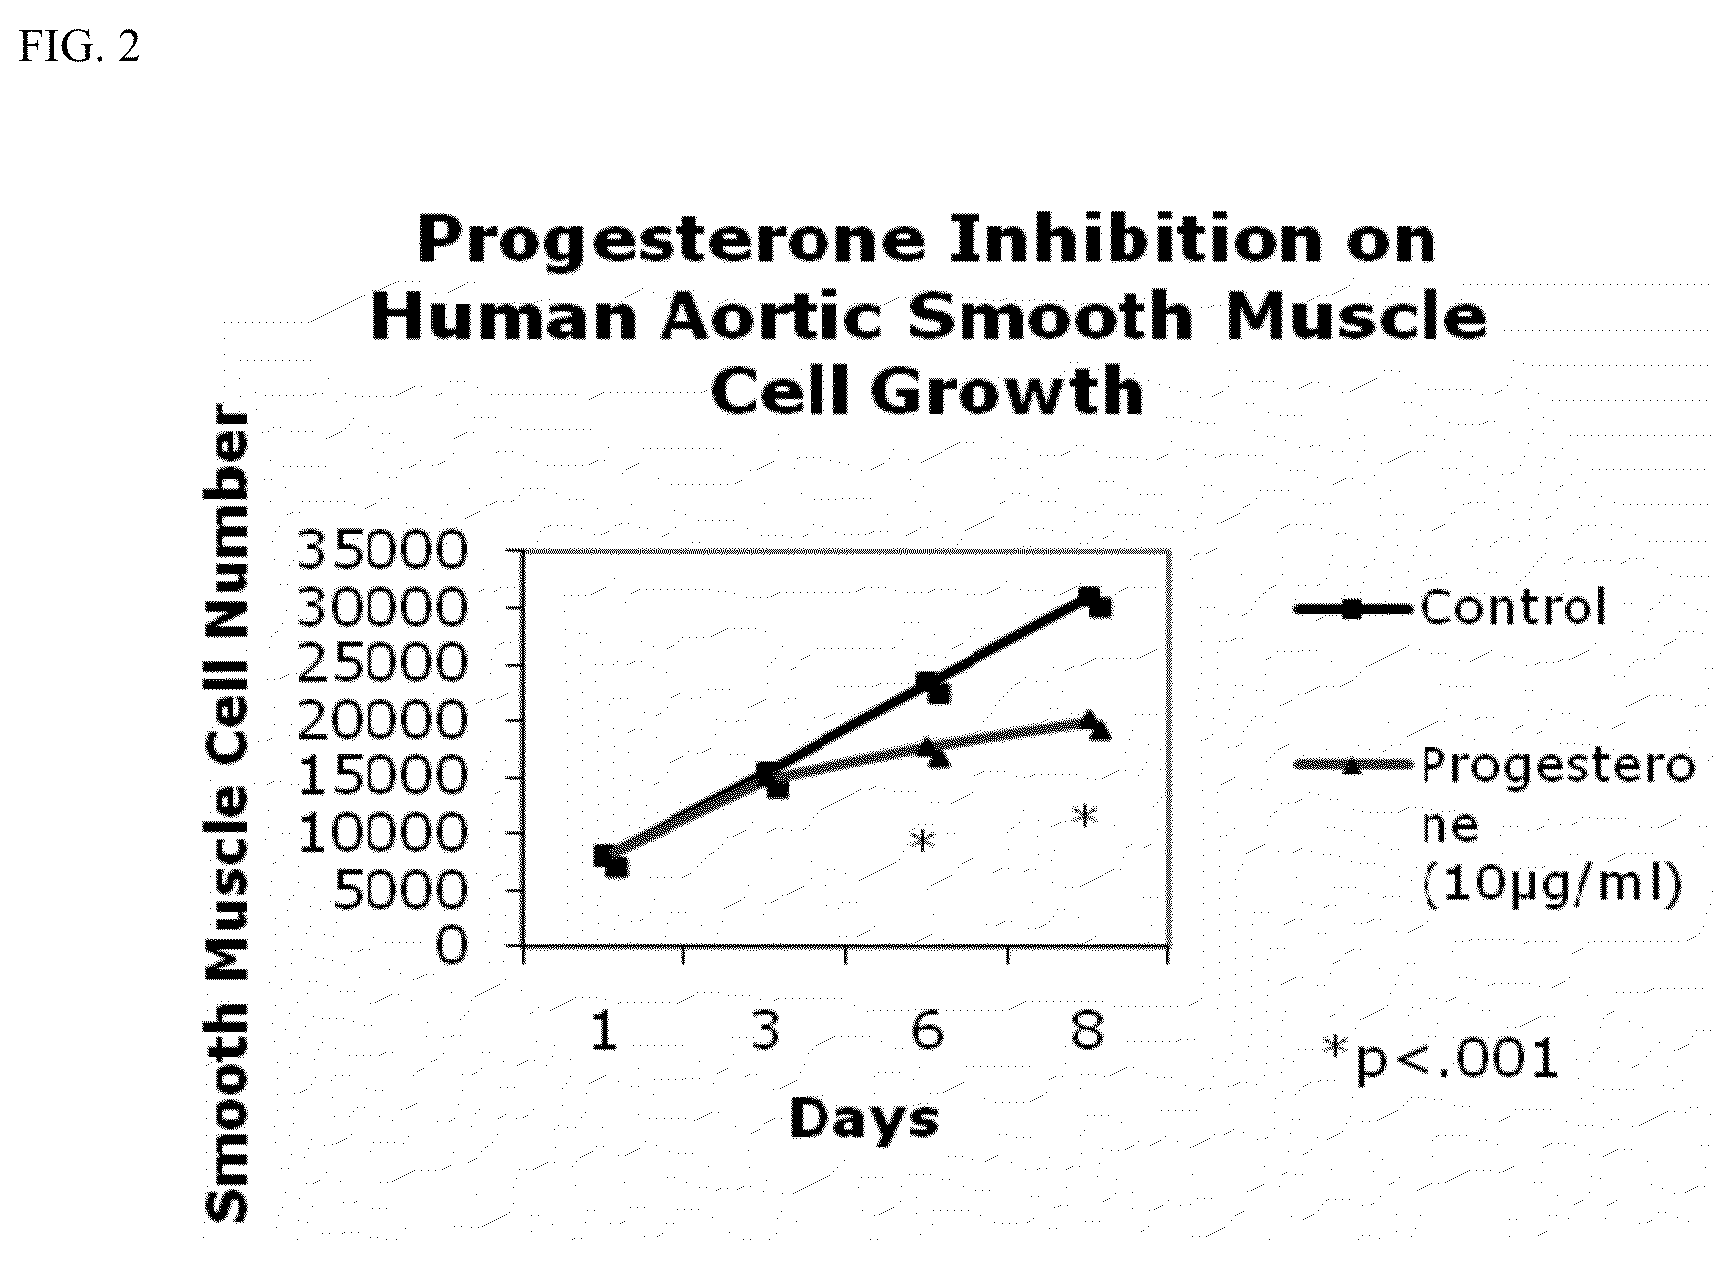 Progesterone-containing compositions and devices